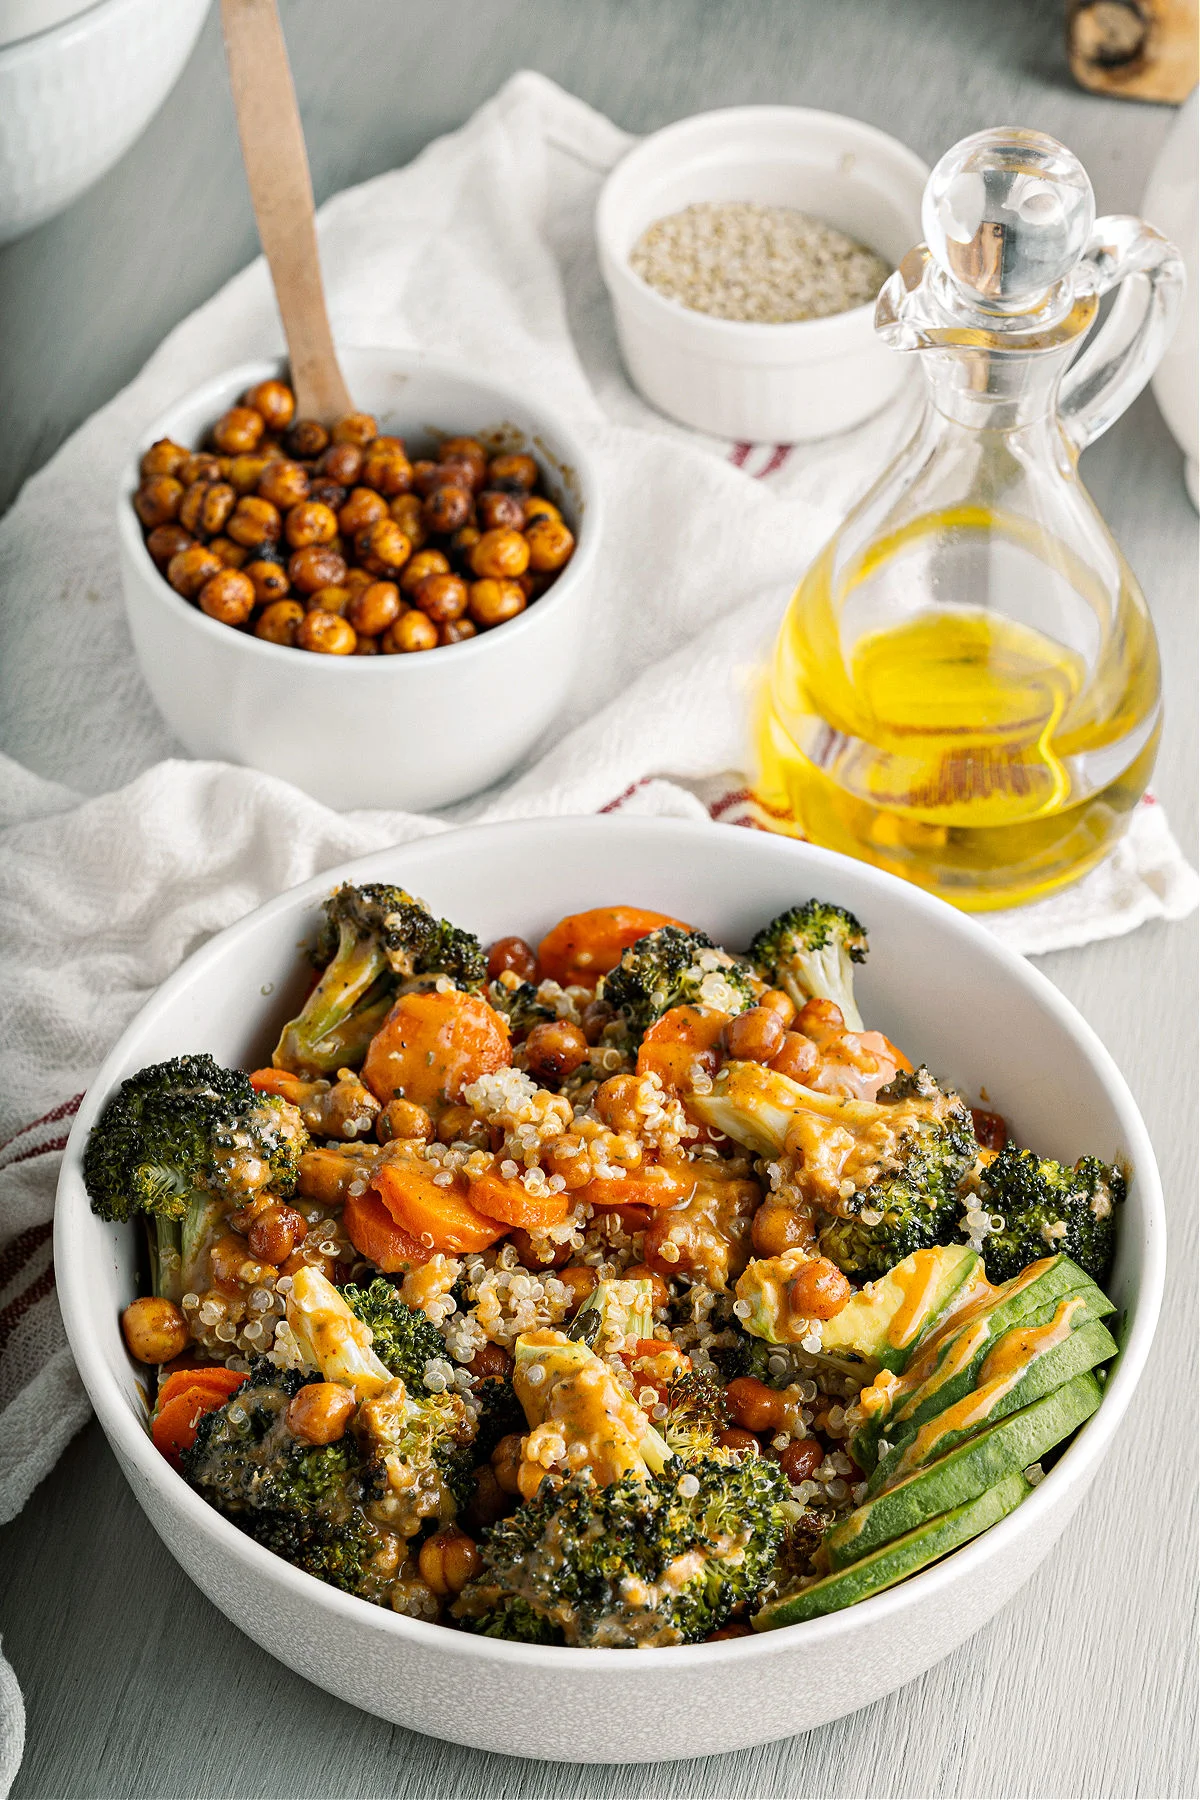 Broccoli buddha bowl in a white serving bowl with chickpeas on the side.